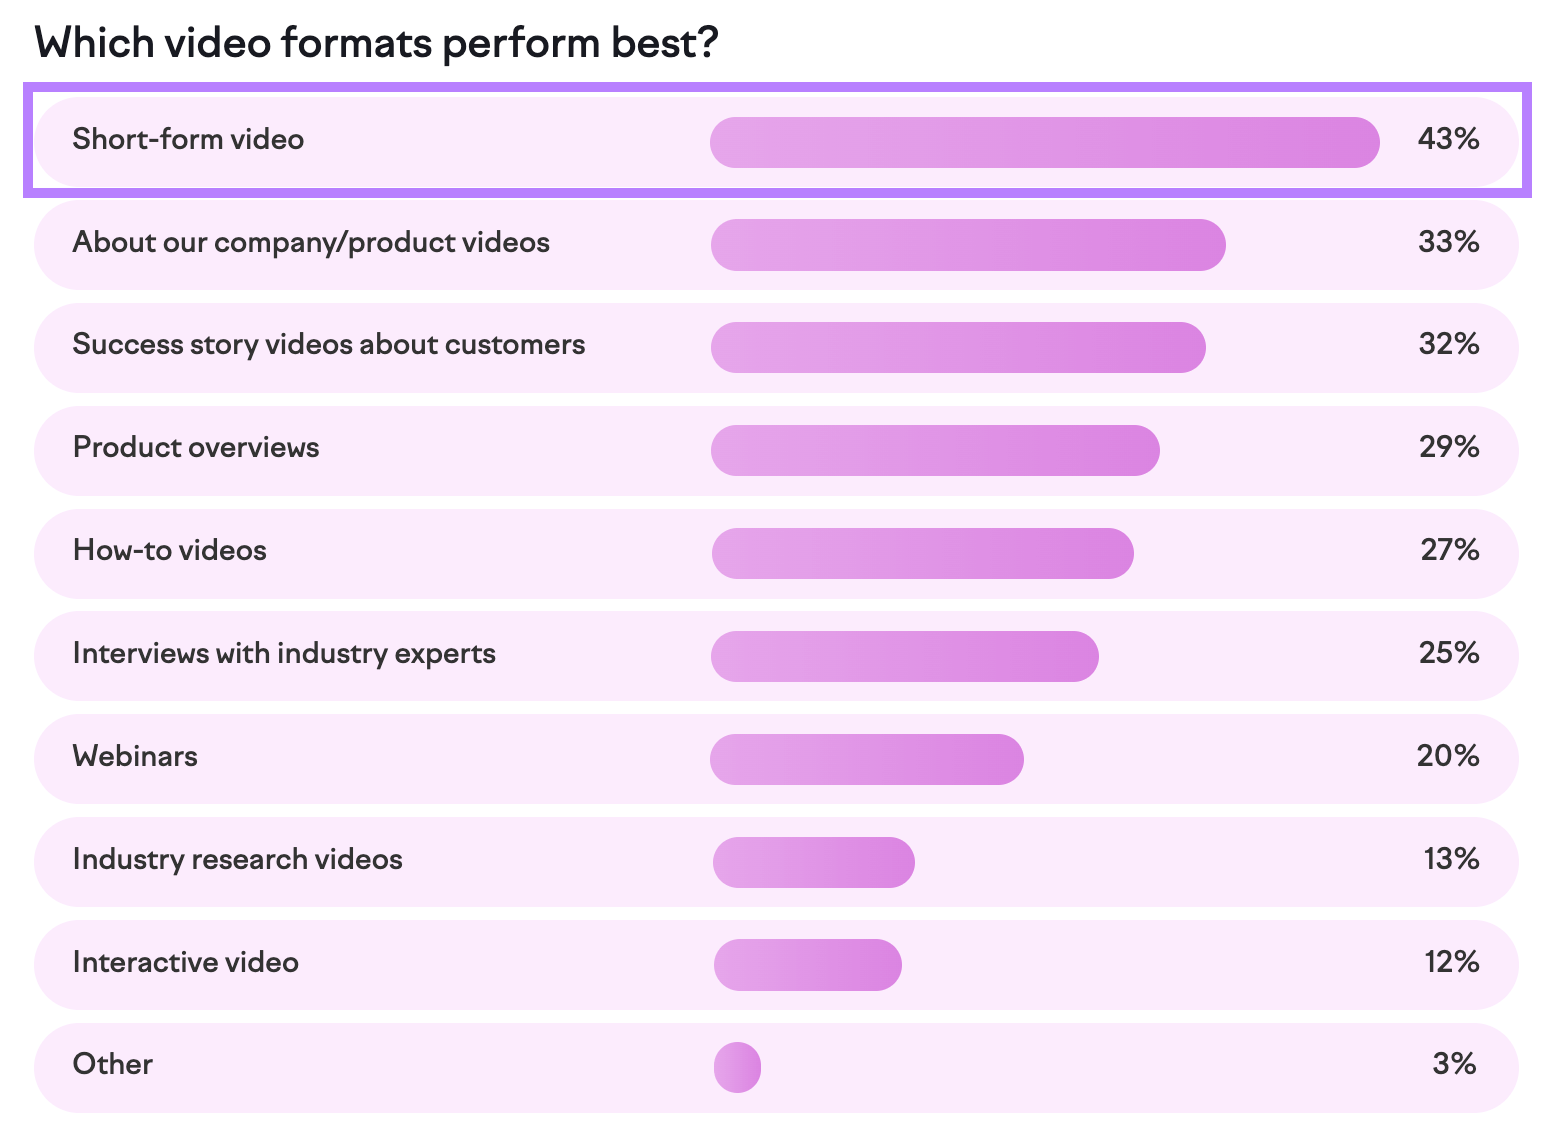 Semrush survey results table showing 43% say short form video performs best according.